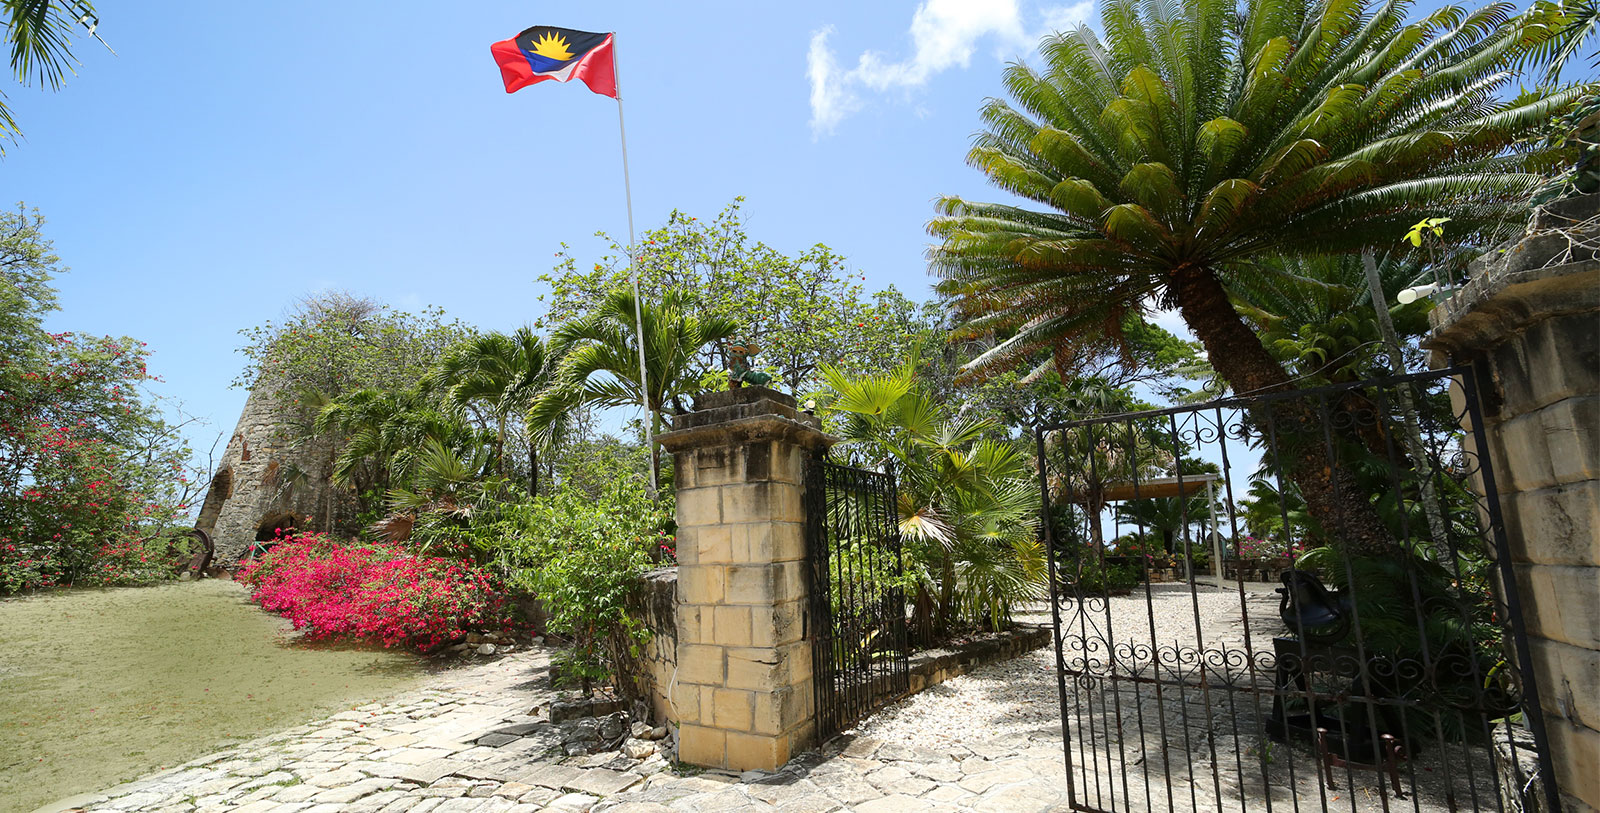 Image of Gated Grounds at The Great House Antigua, 1670, a member of Historic Hotels Worldwide in Mercers Creek Plantation, Antigua and Barbuda